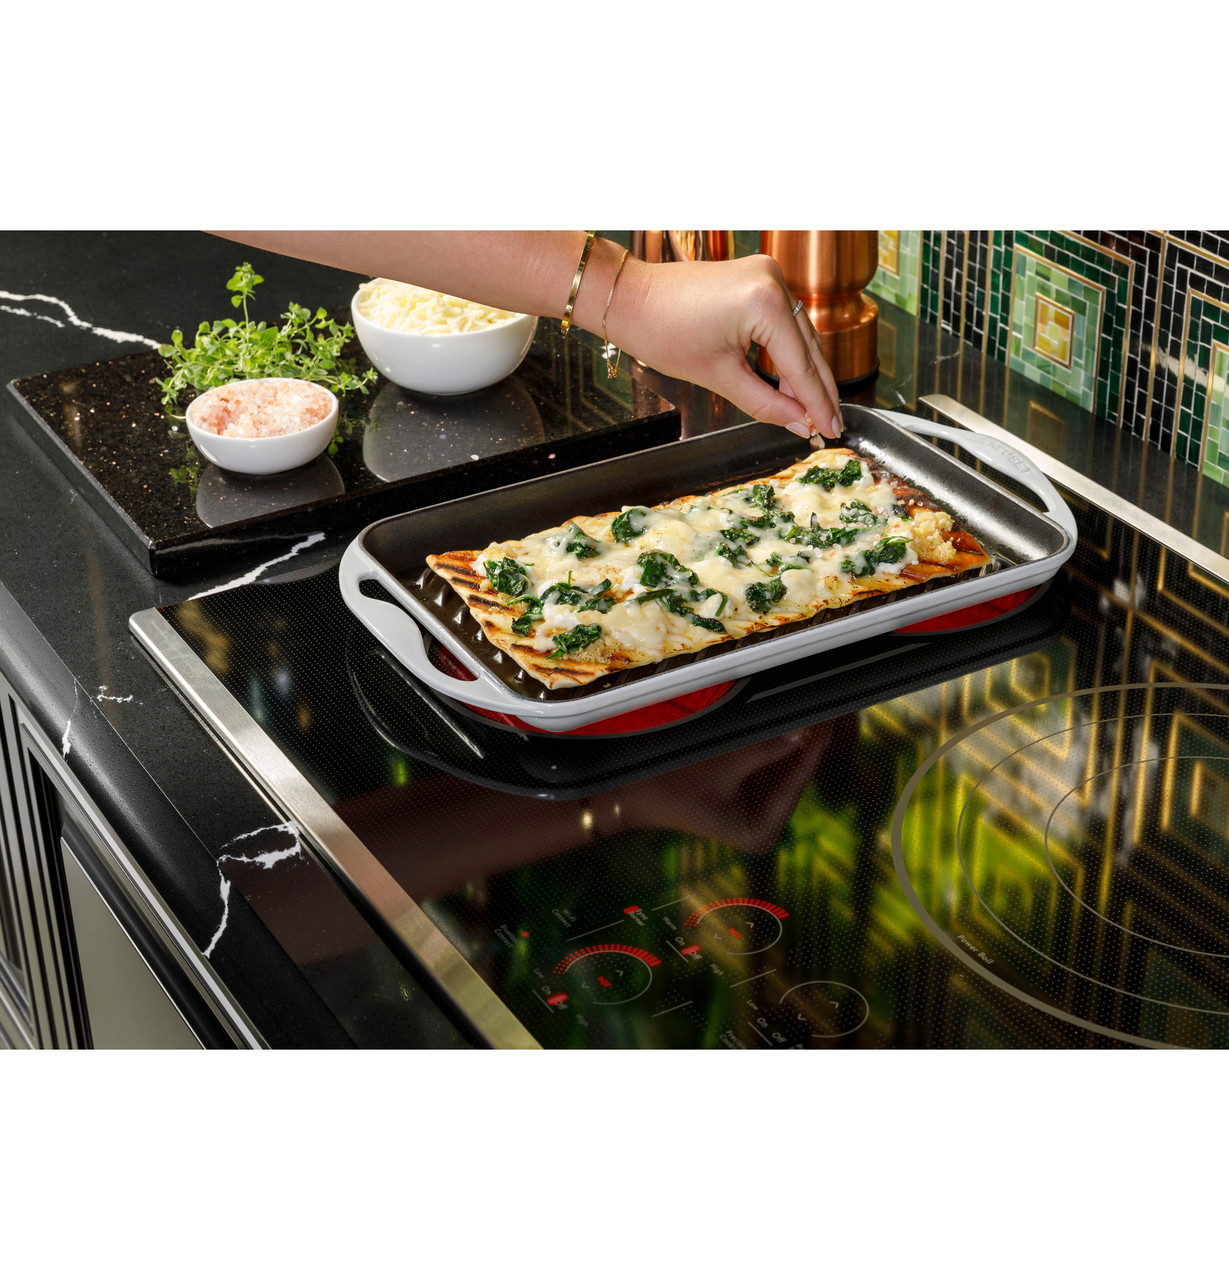 Café™ Series 36 Built-In Touch Control Induction Cooktop - CHP90362TSS -  Cafe Appliances